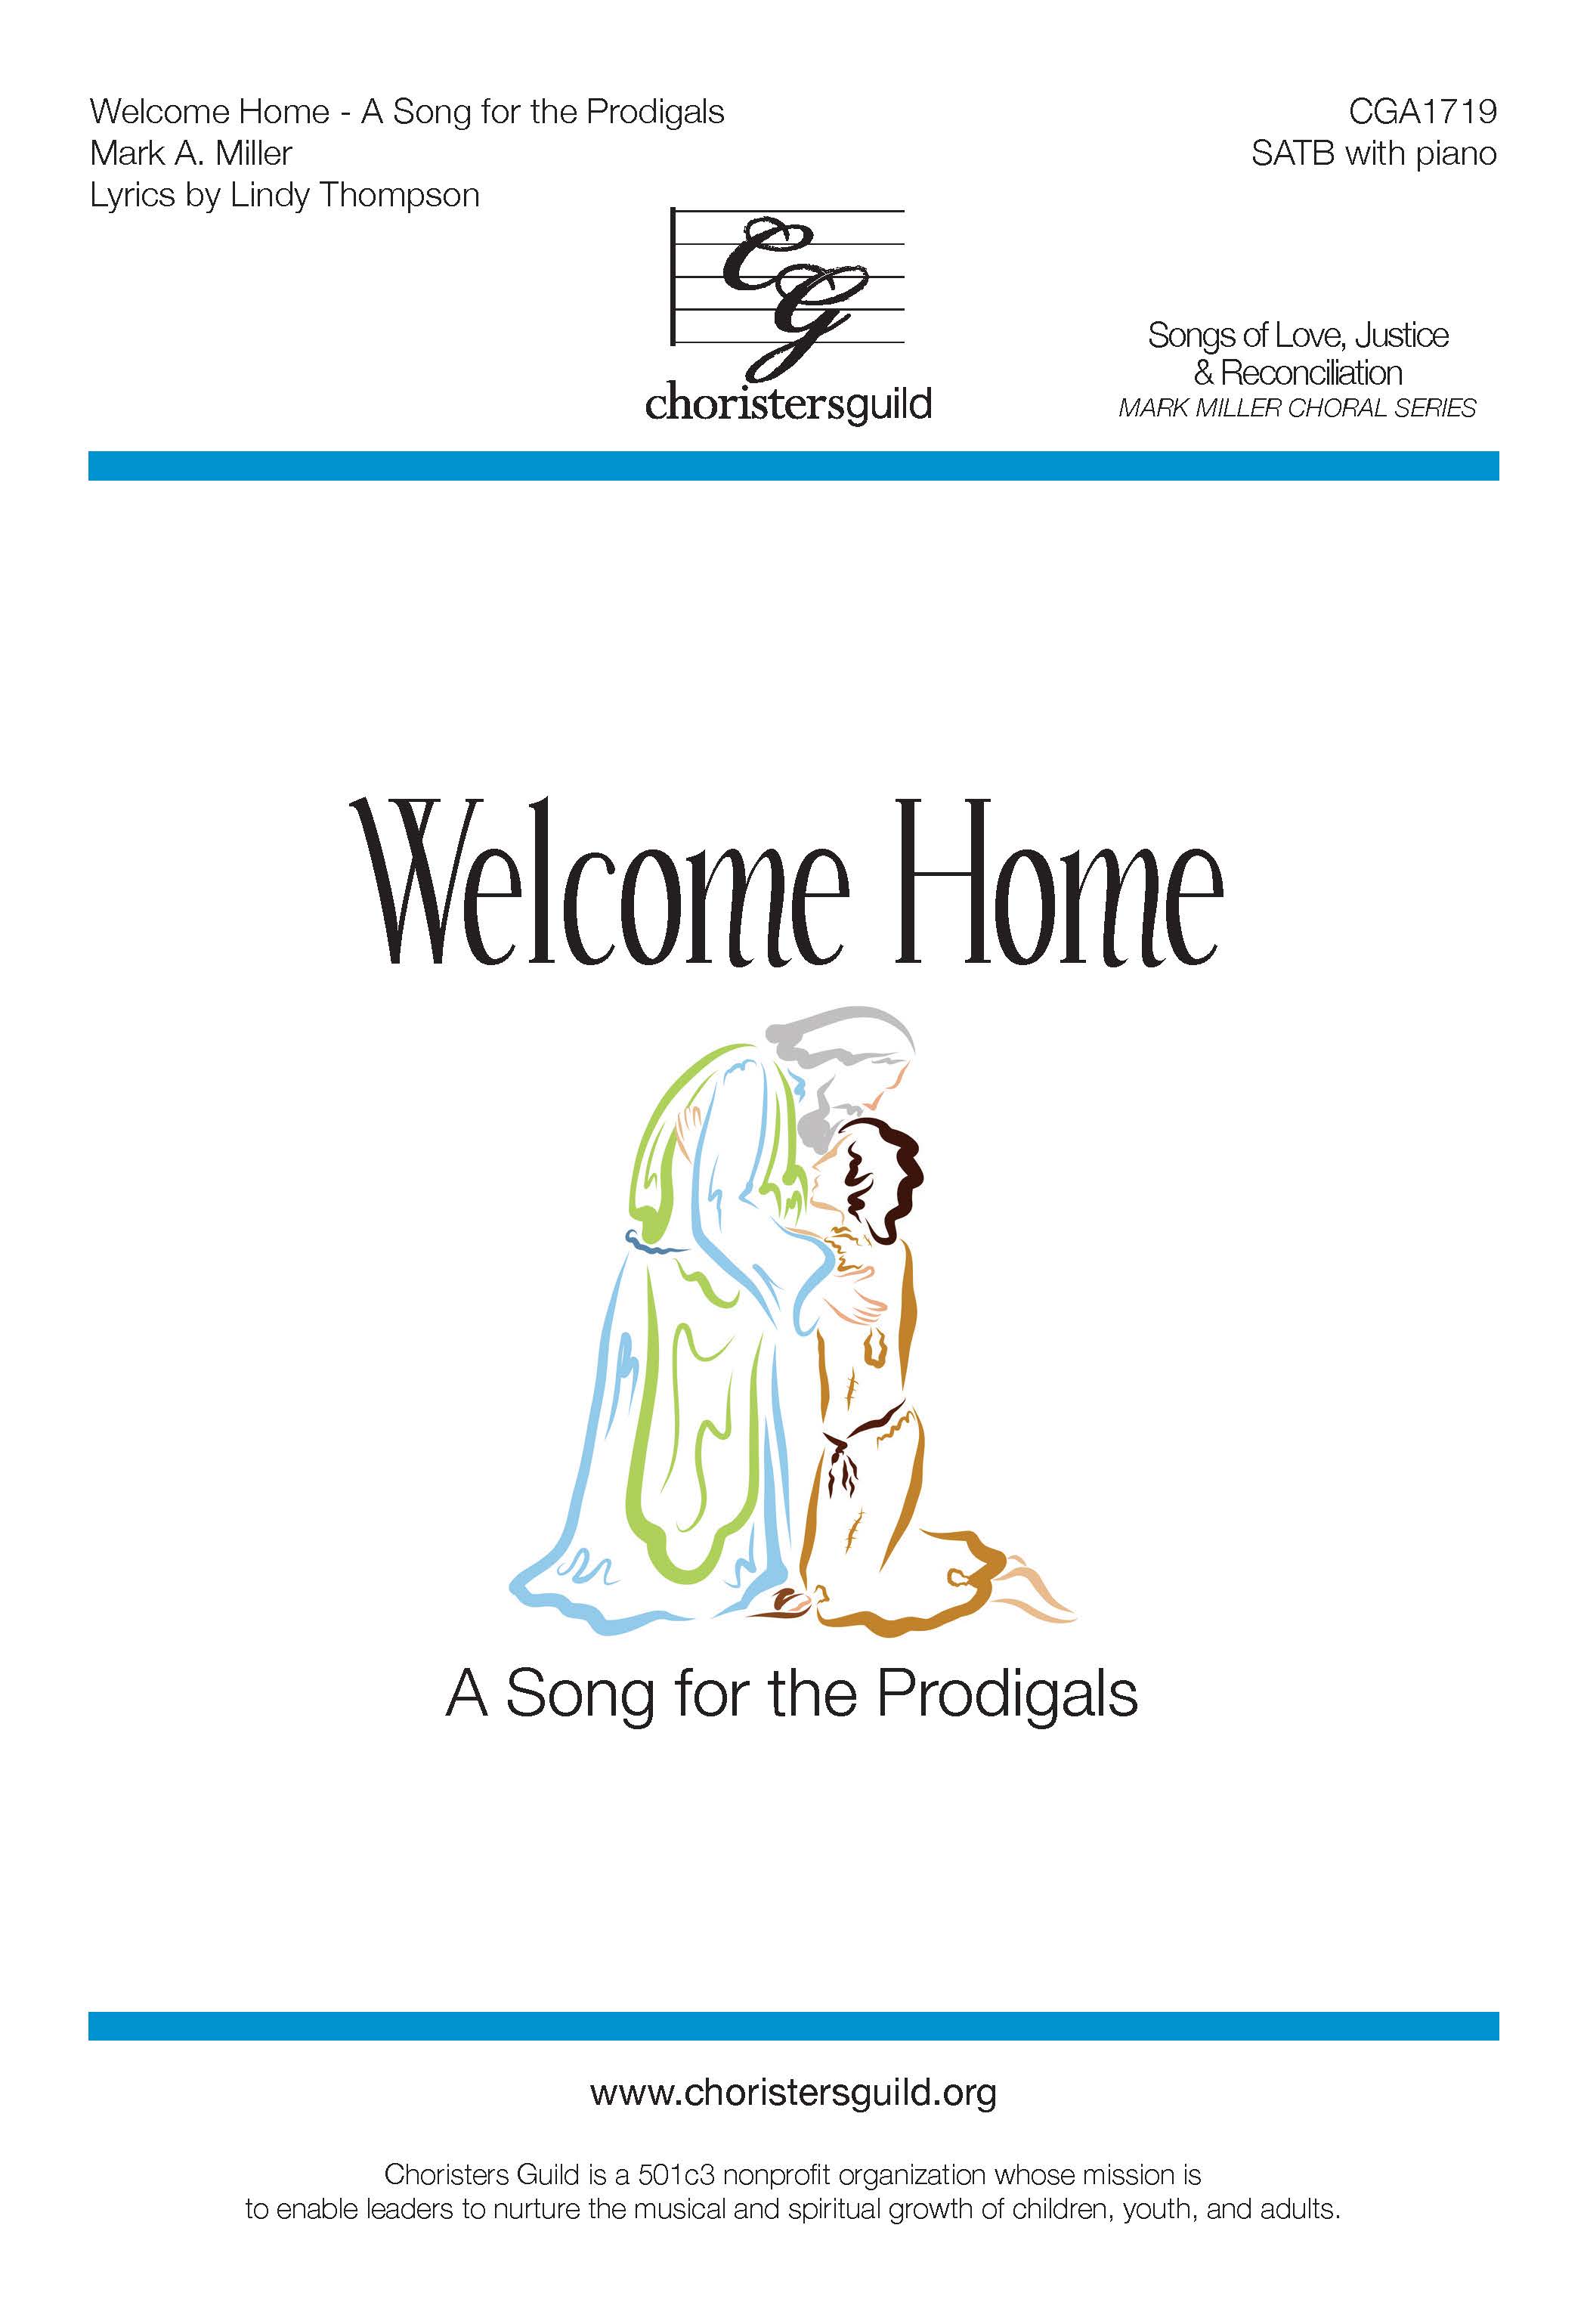 Welcome Home (Song for Prodigals) - SATB